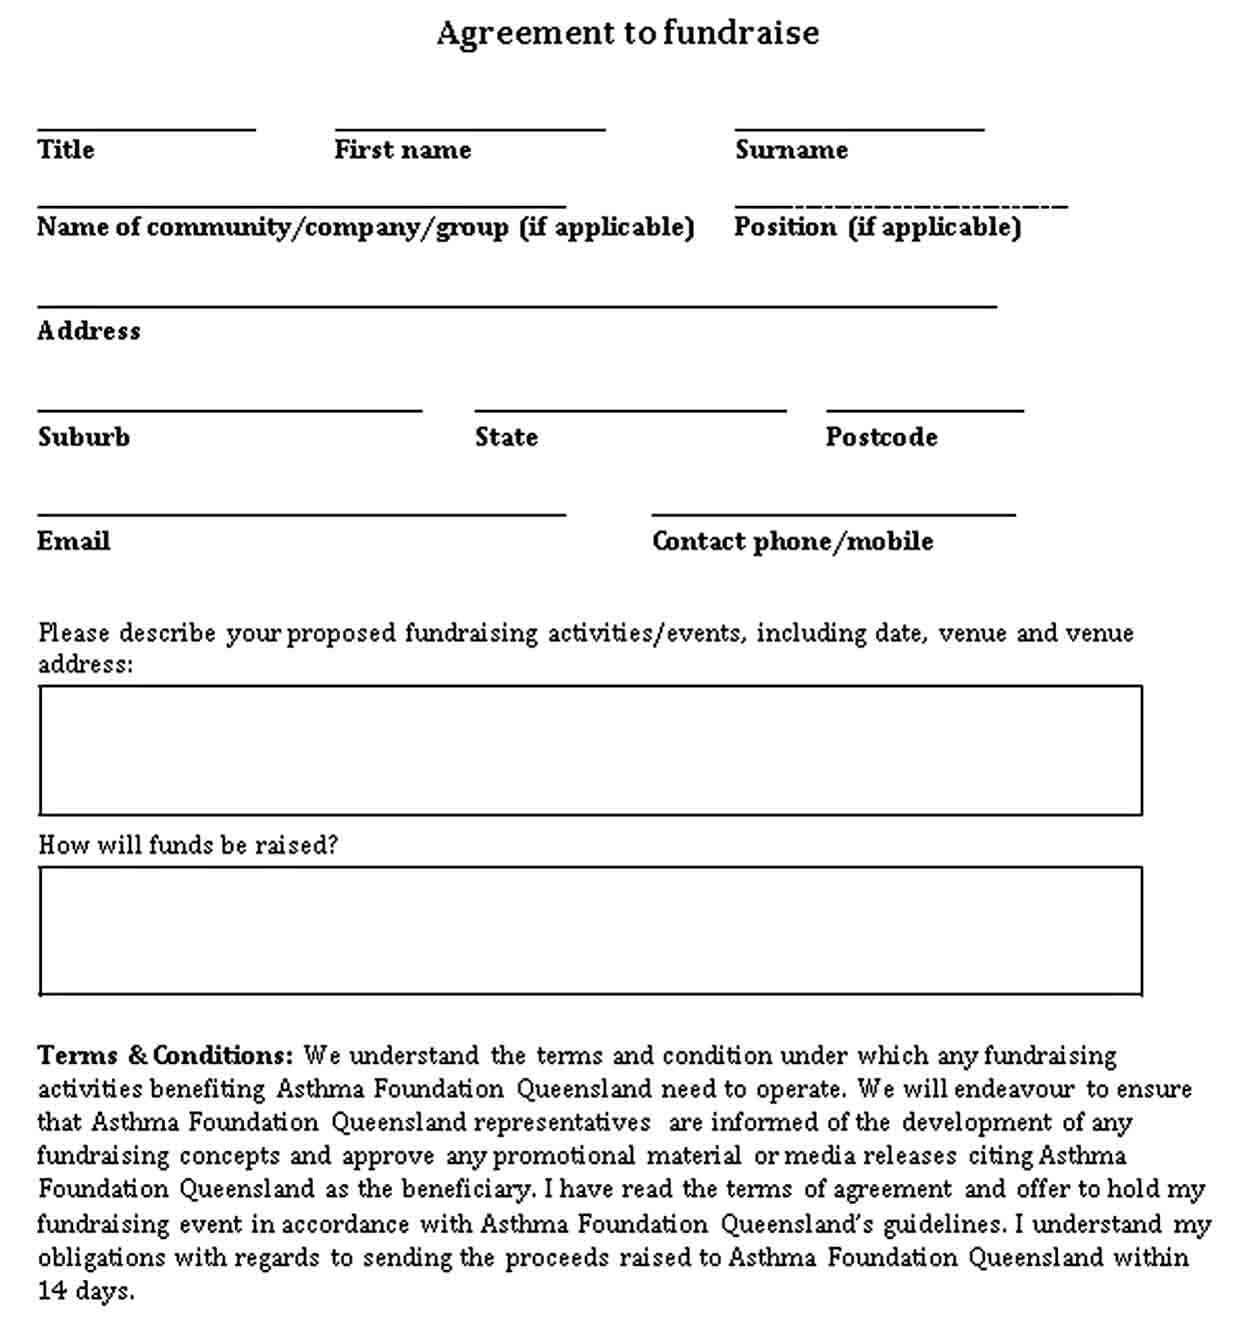 Sample Printable Agreement to fundraise